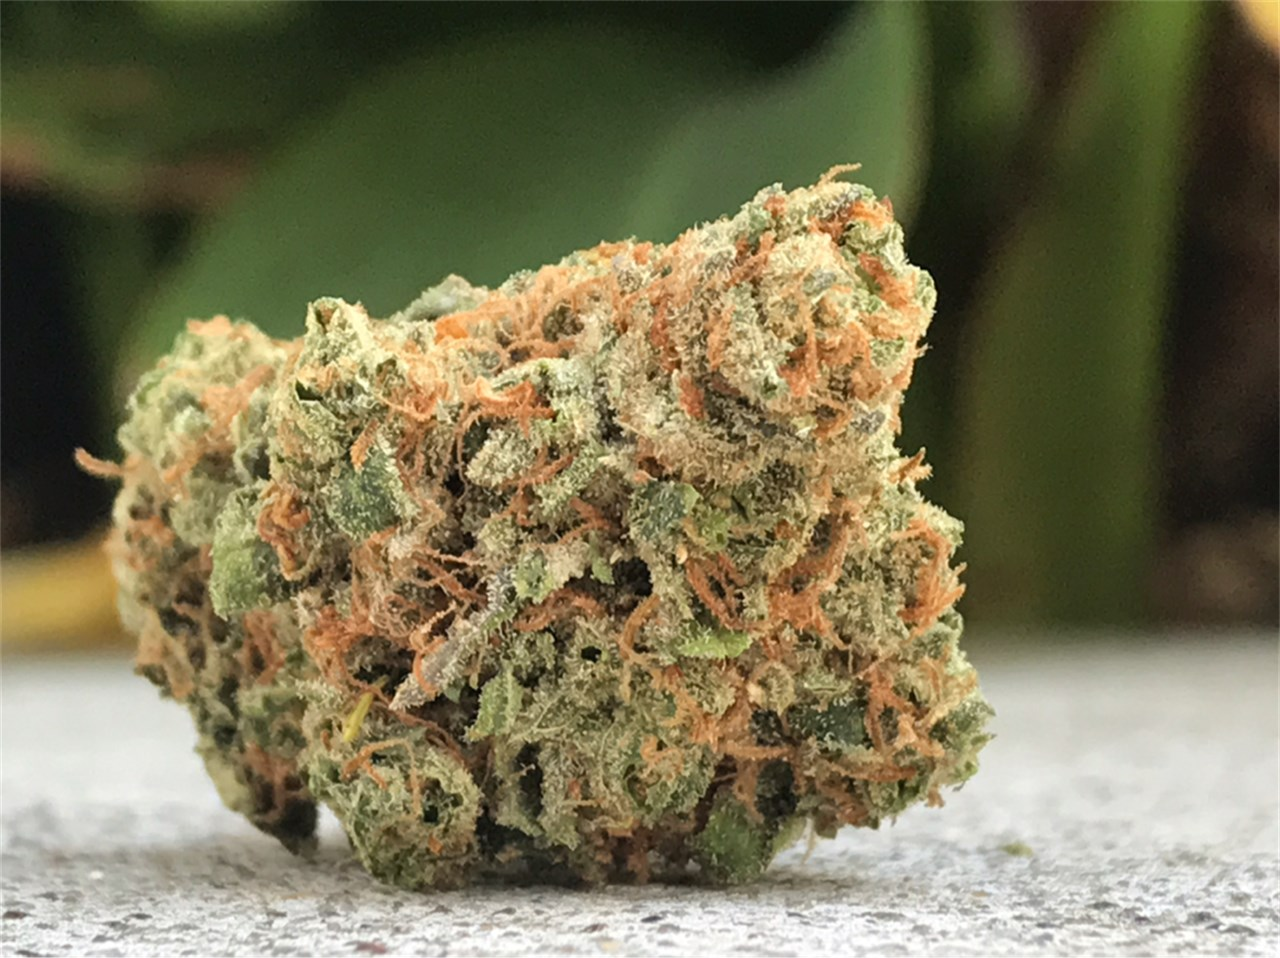 The Maui Wowie strain has unique physical characteristics and medicinal benefits. 